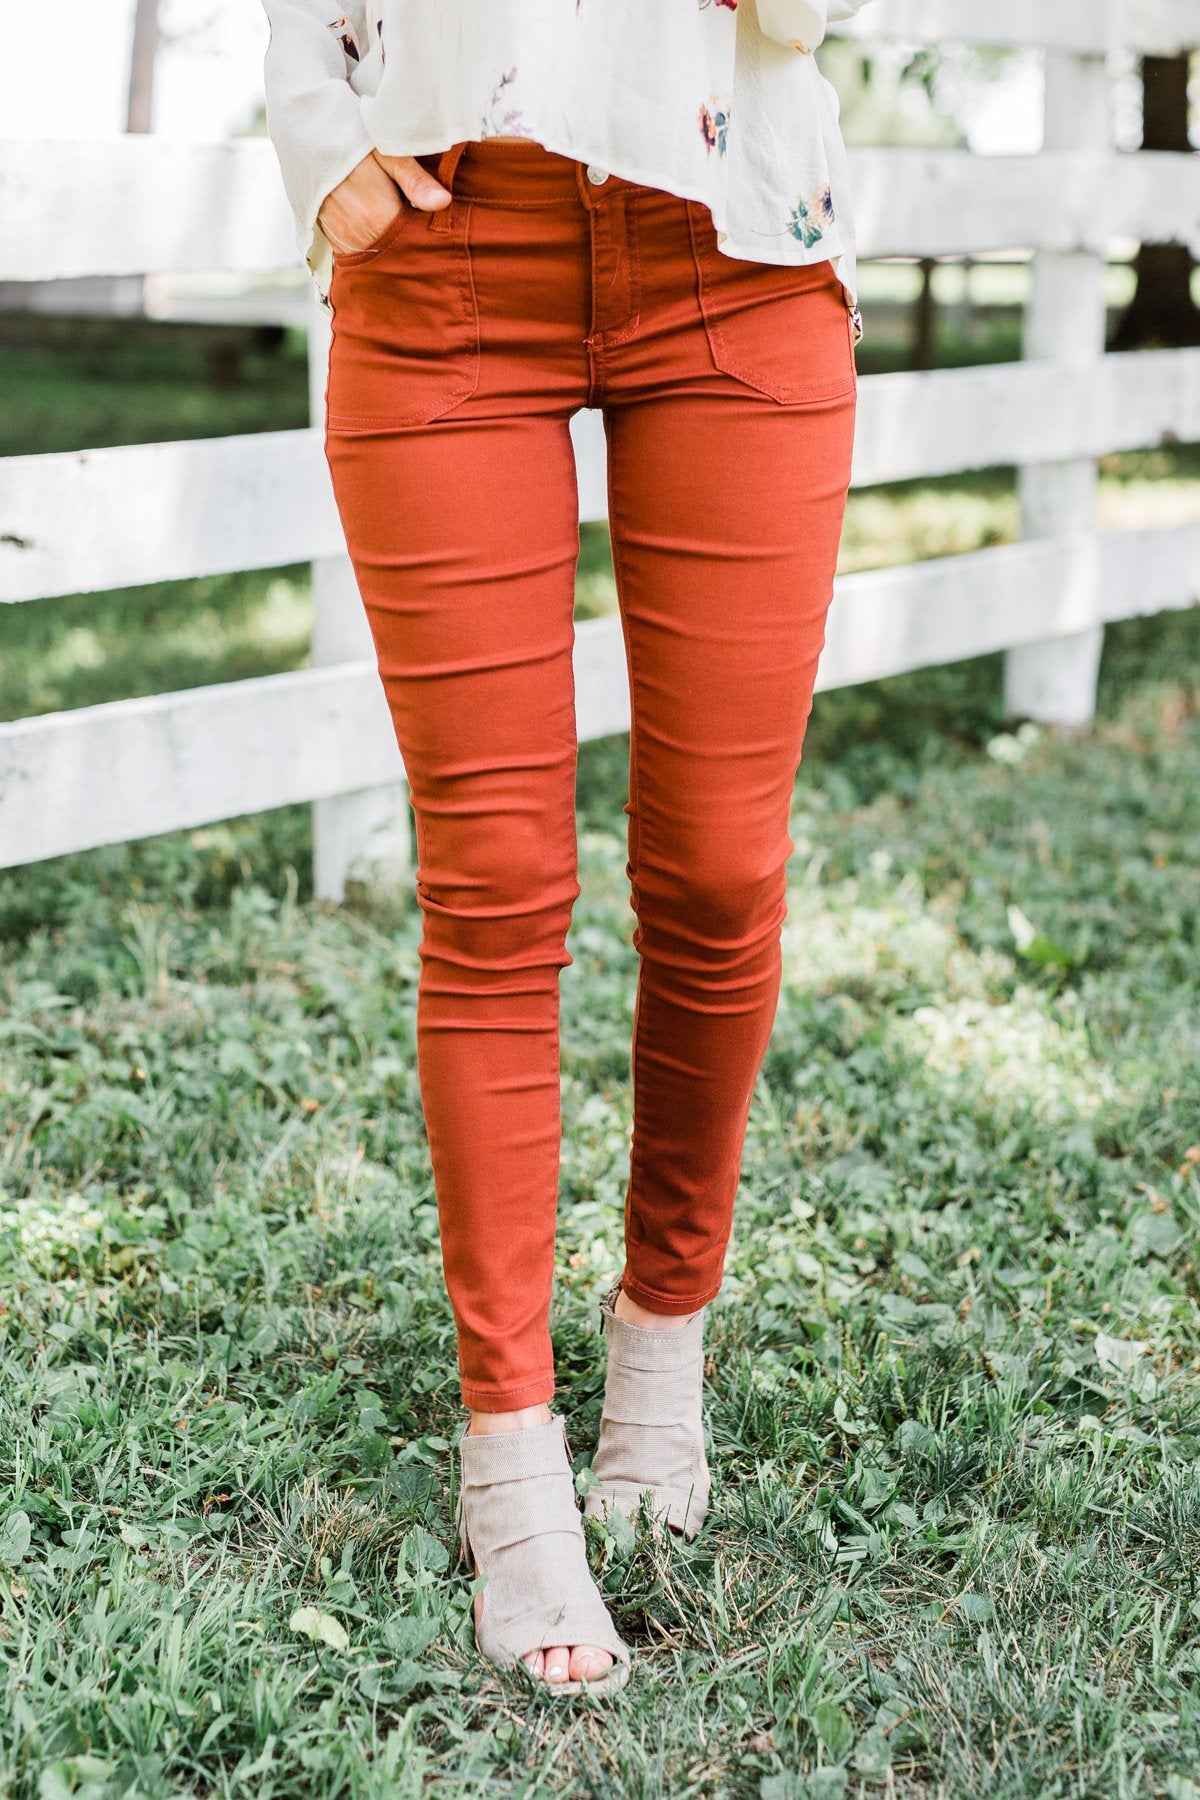 Neon Pink Skinny Jeans | Neon Pink Jeans | Summer Jeans – Saved by the Dress